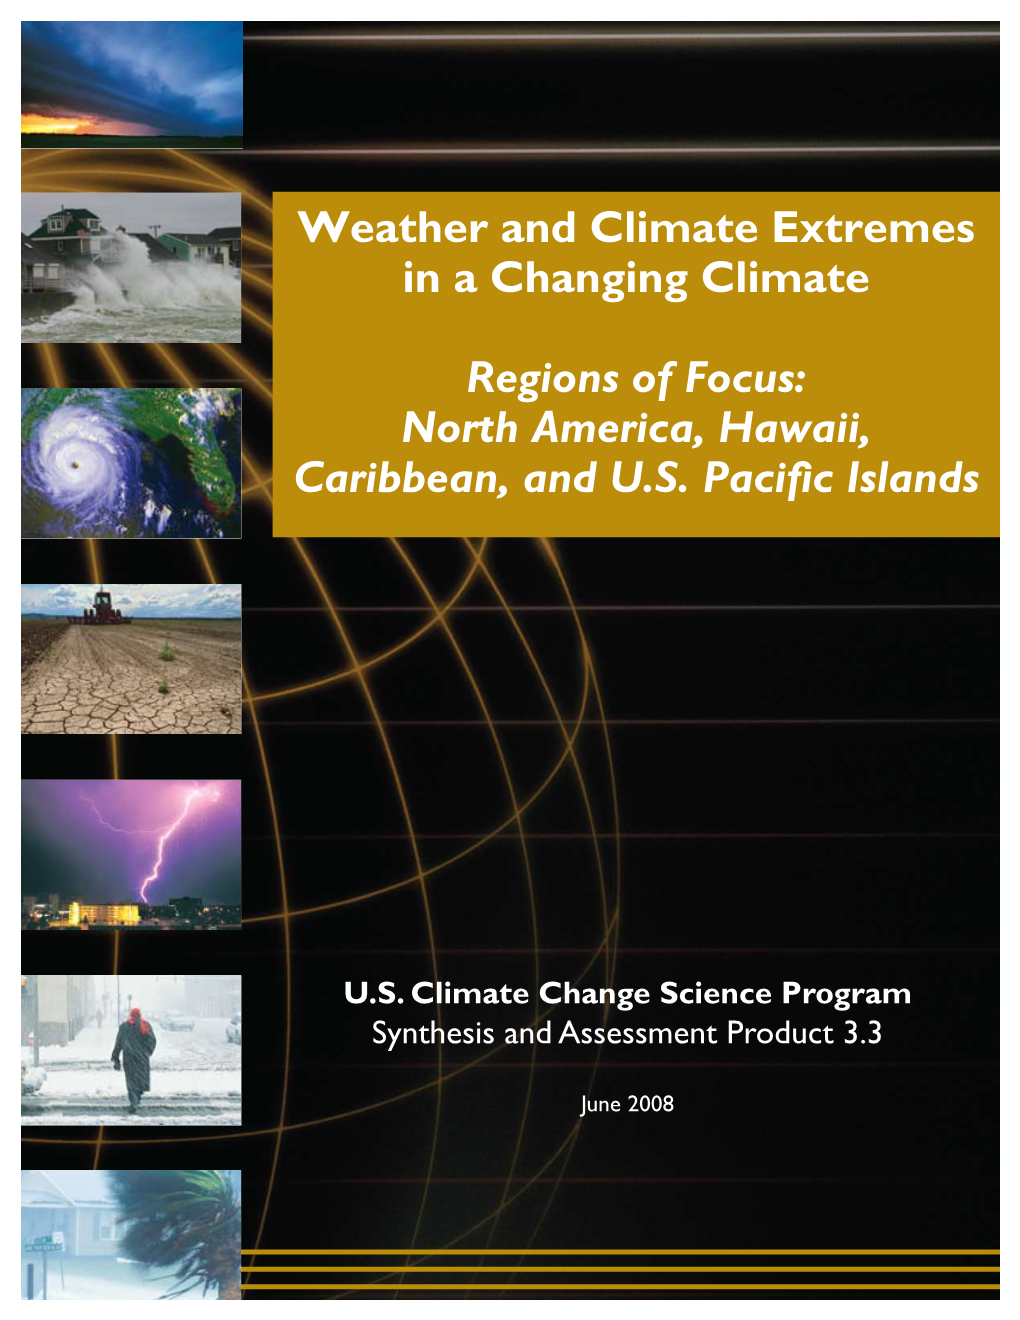 Weather and Climate Extremes in a Changing Climate Regions of Focus: North America, Hawaii, Caribbean, and U.S. Pacific Islands